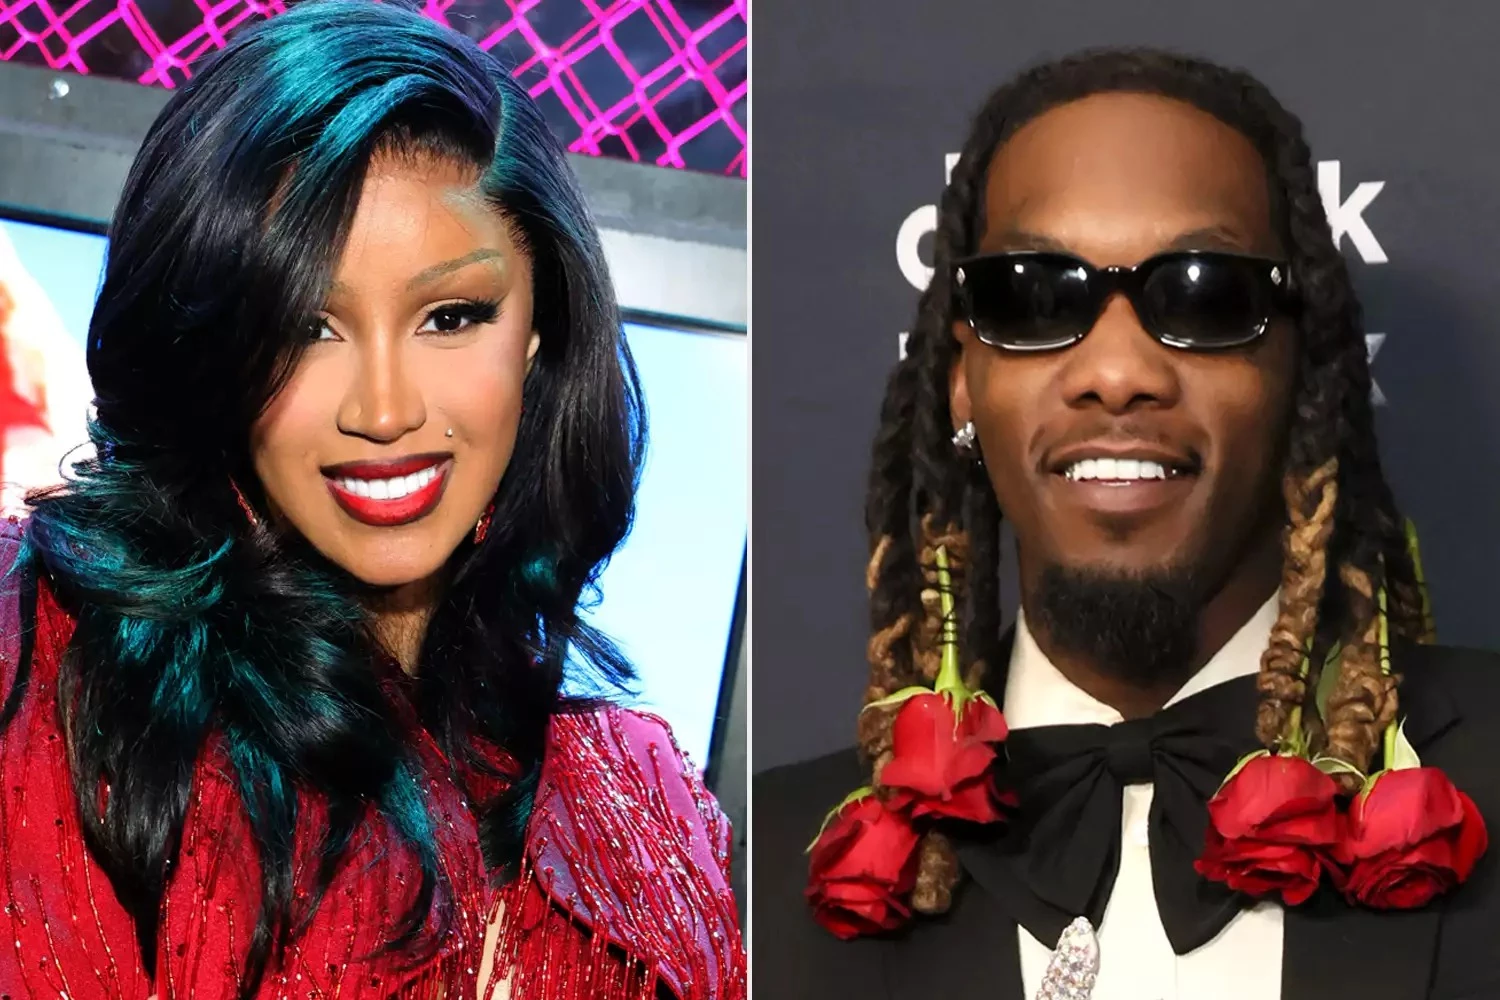 Cardi B stops discussing her relationship with estranged husband Offset